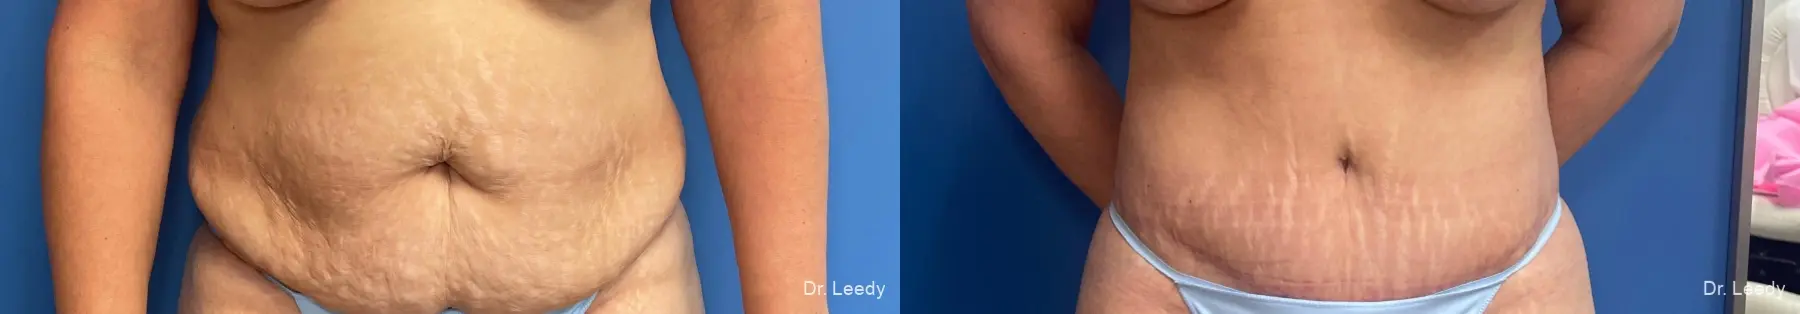 Lipoabdominoplasty: Patient 1 - Before and After  